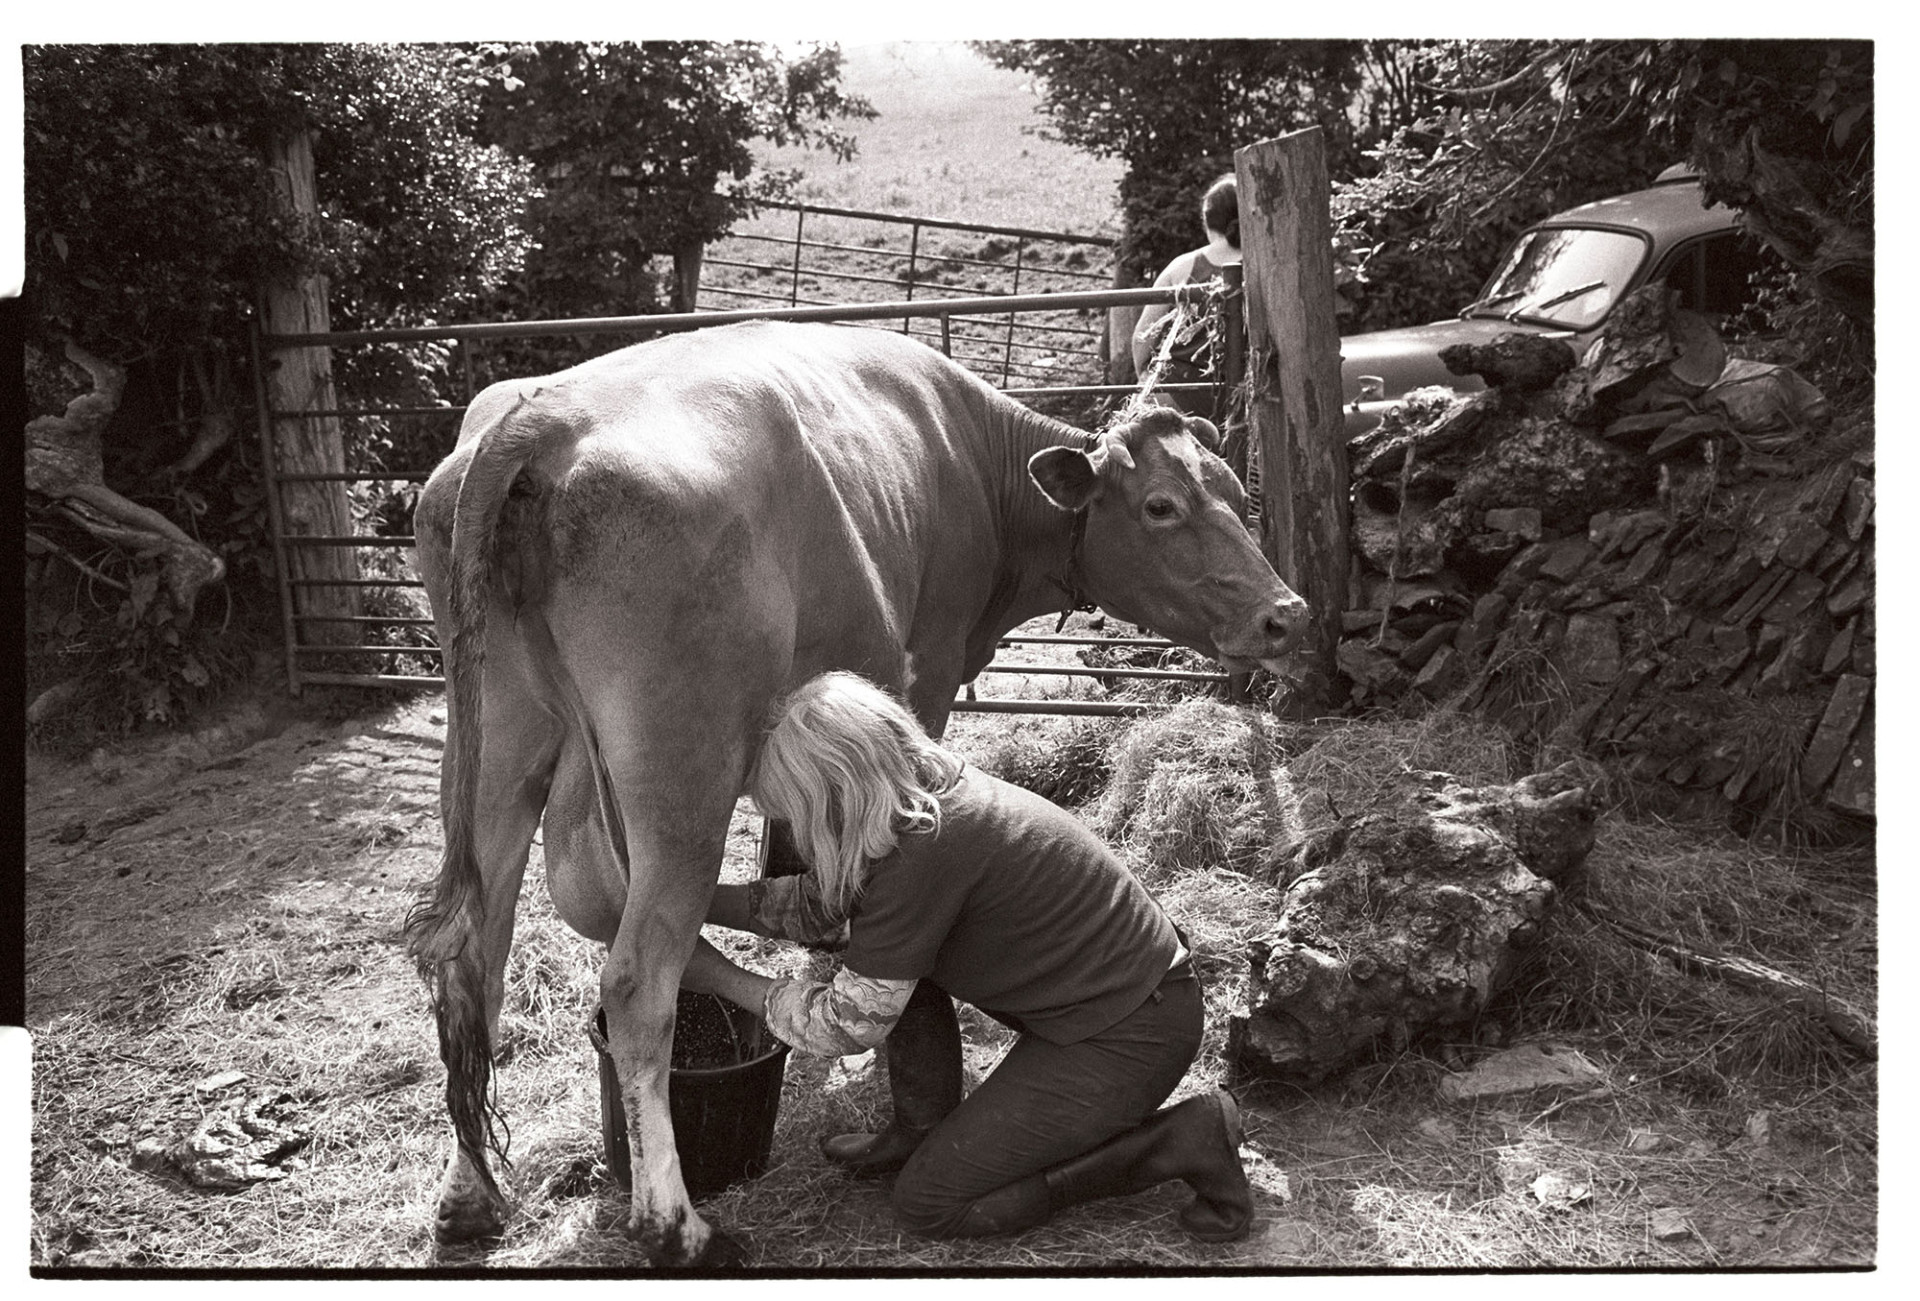 Woman milking cow by hand. 
[Jo Curzon milking a cow by hand, by a field gate at Millhams, Dolton. A person is standing by a parked car on the other side of the gate.]